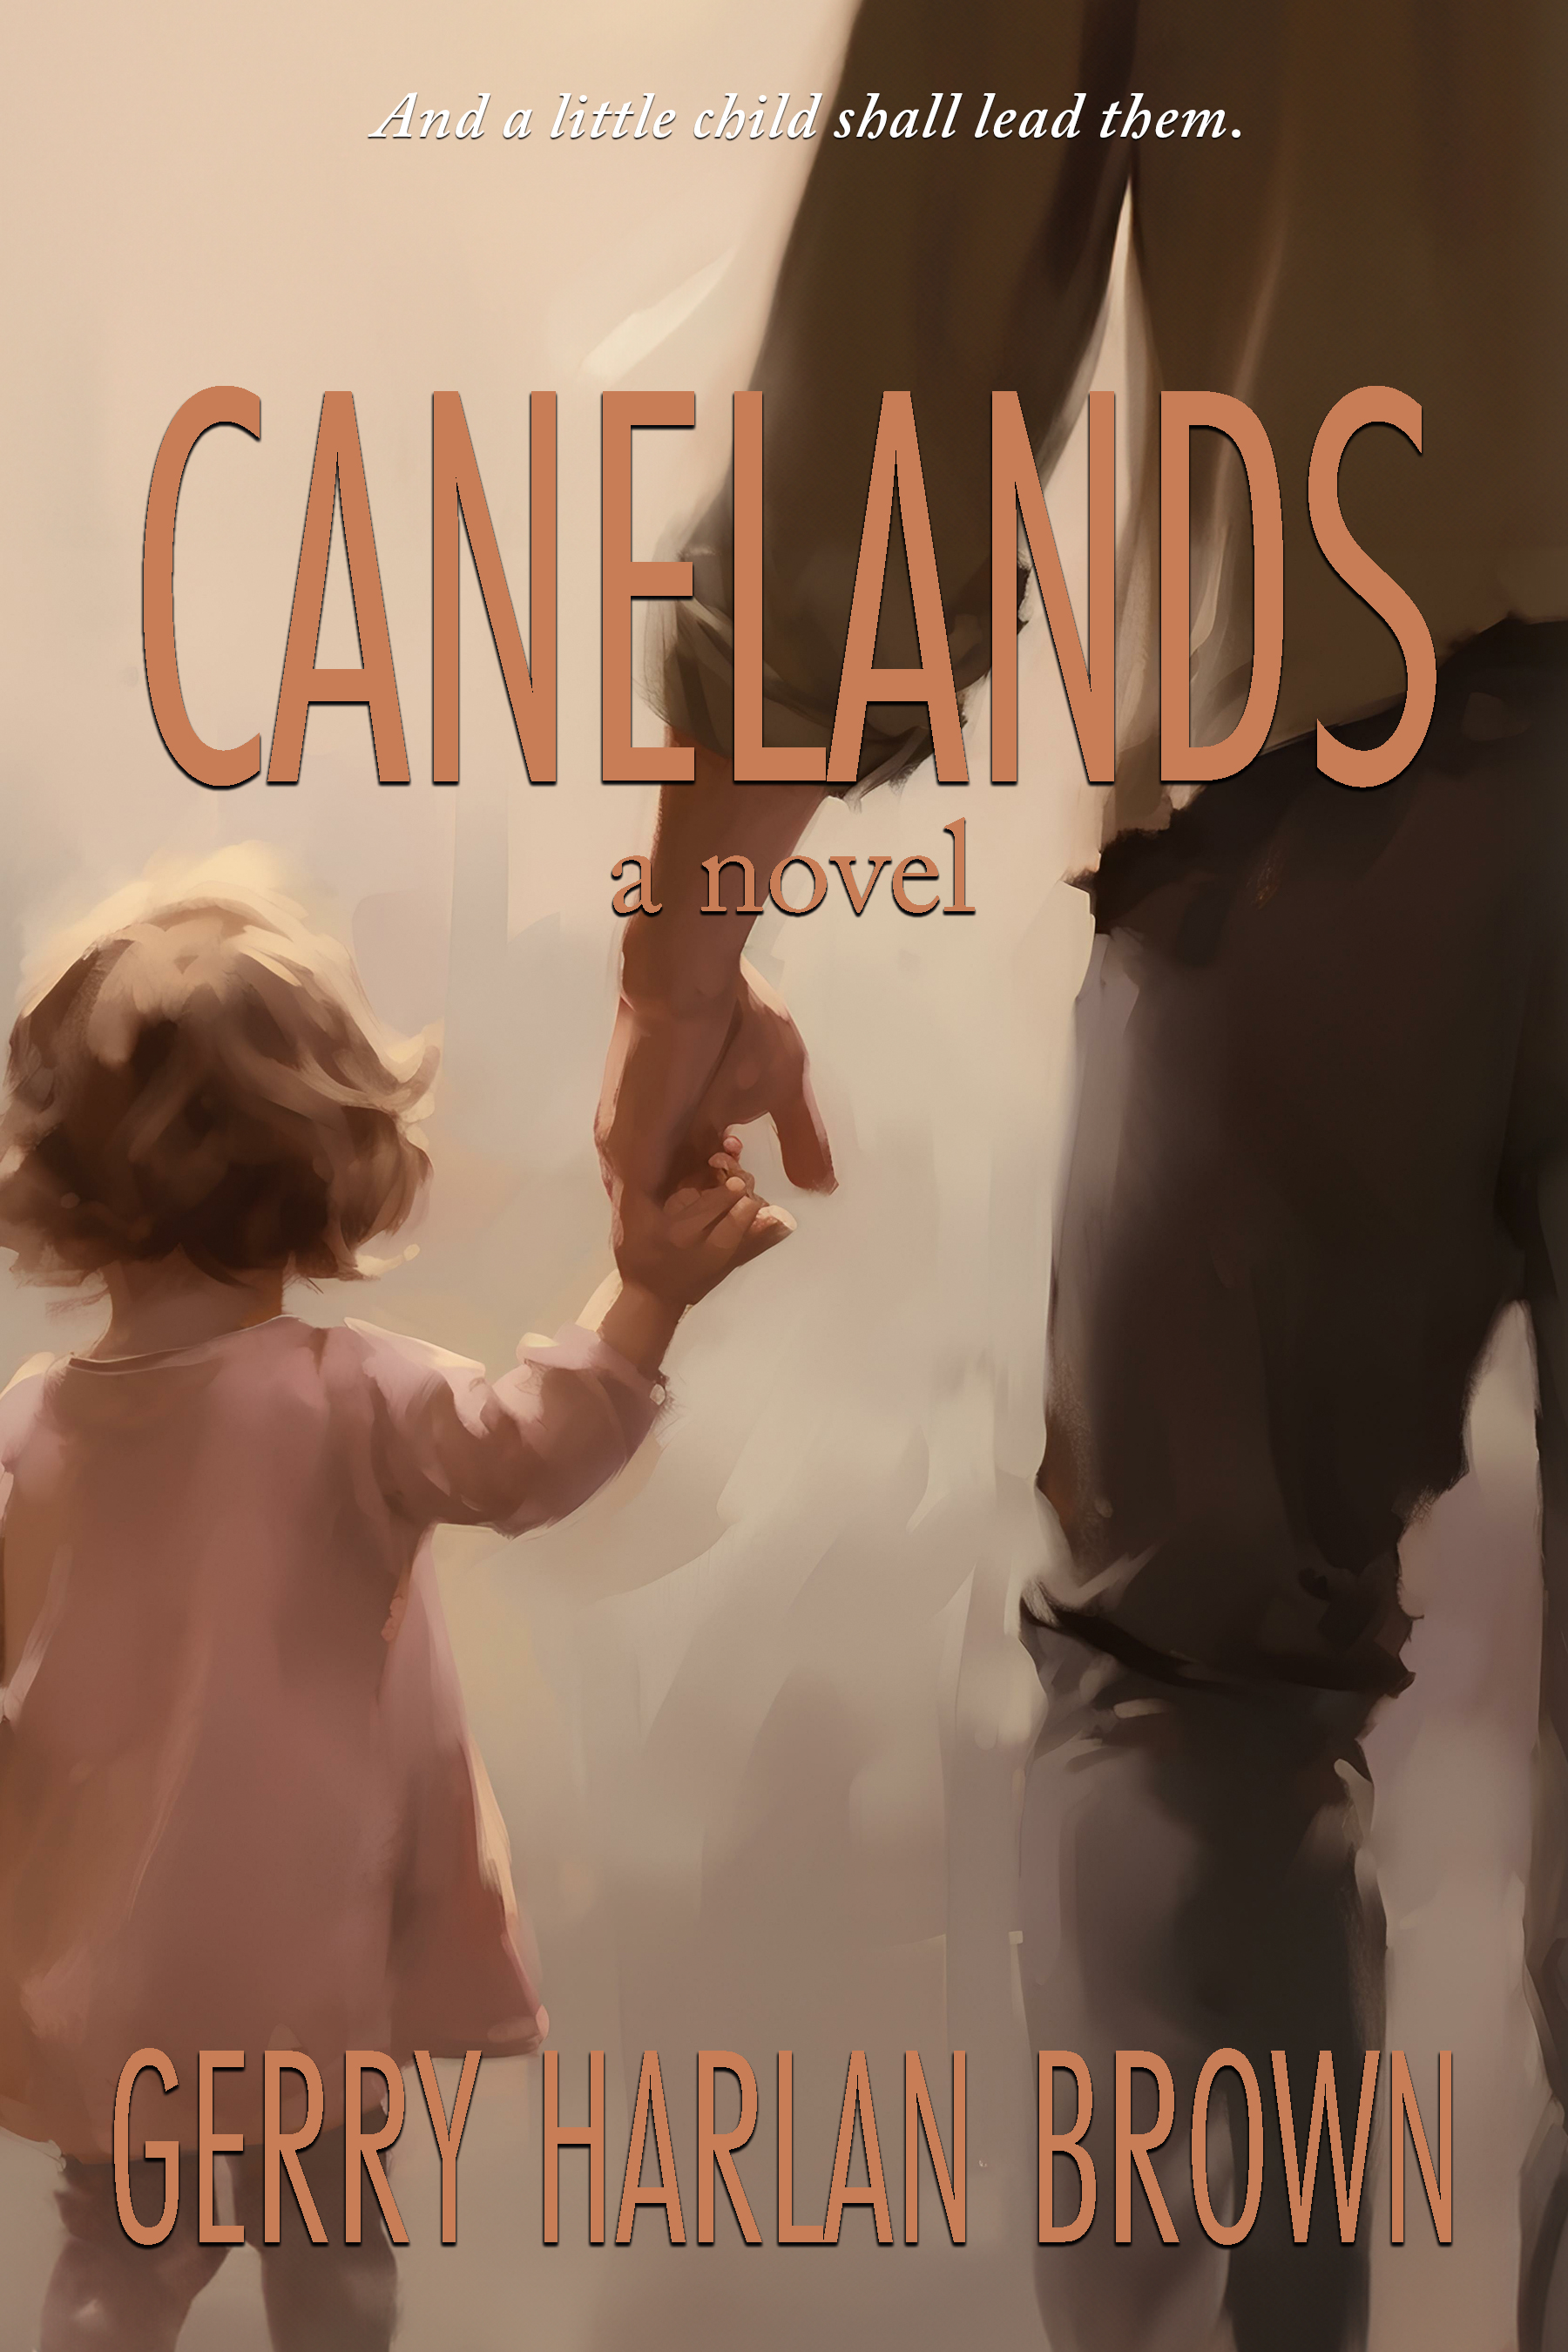 Book cover - Canelands by Gerry Harlan Brown